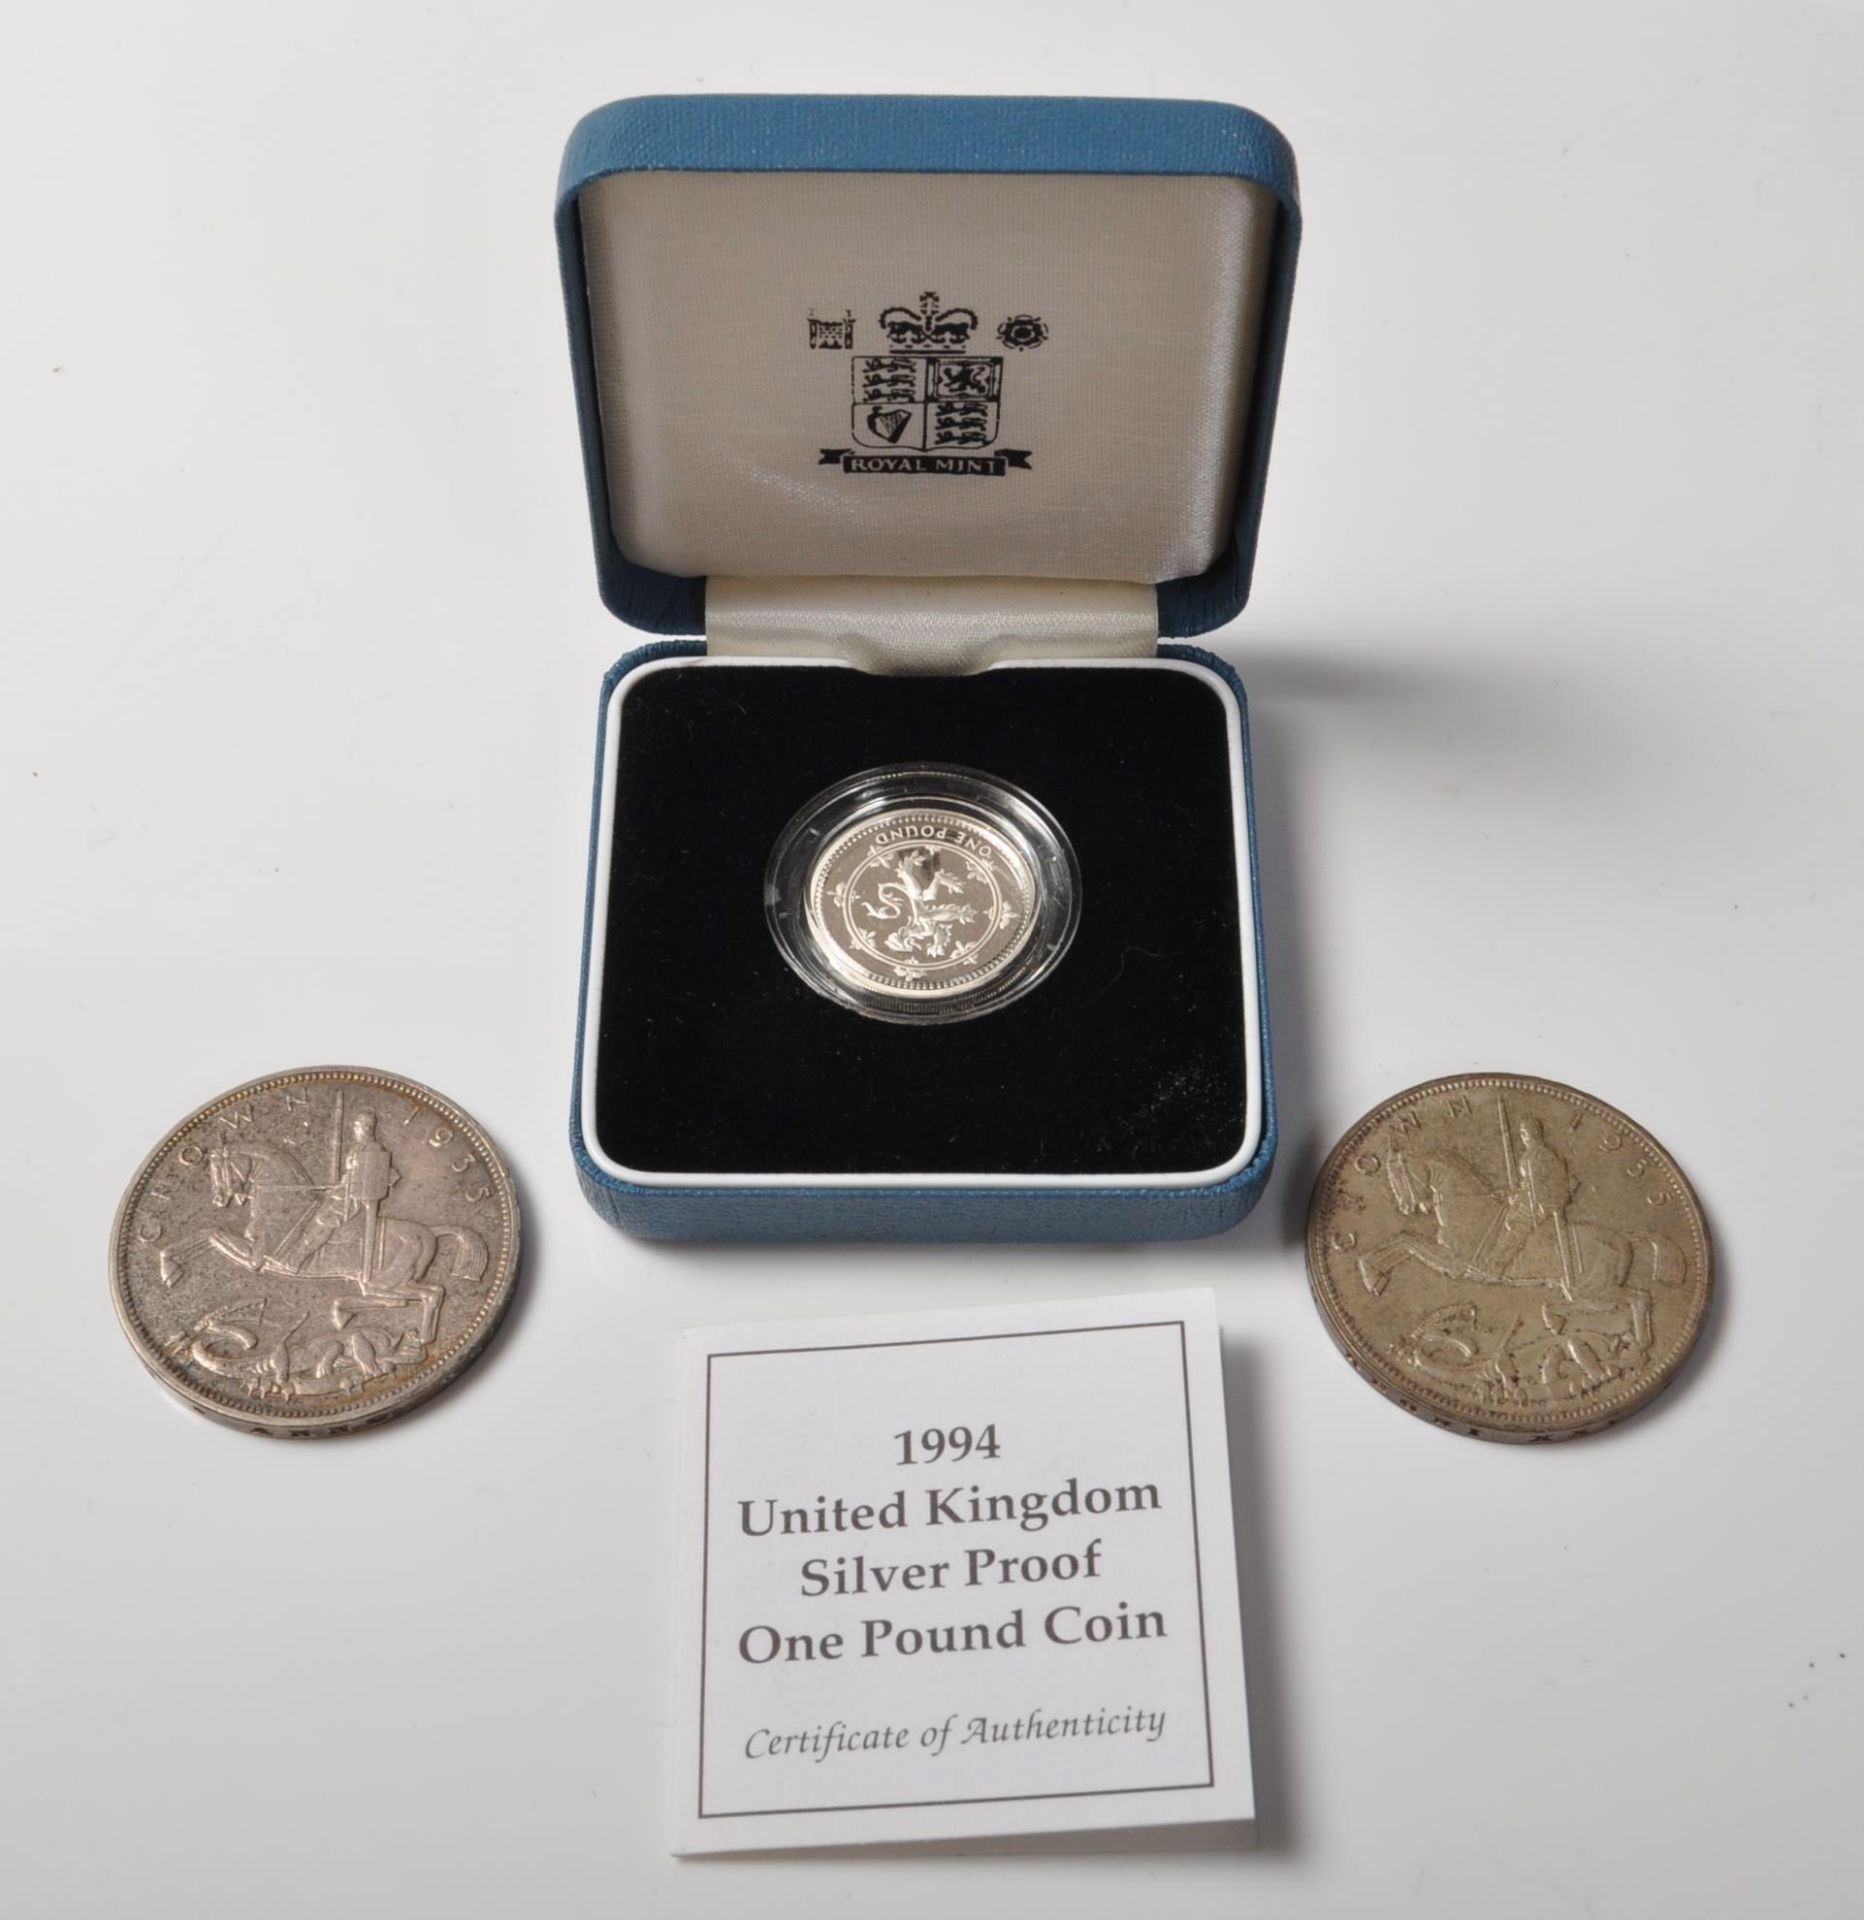 1994 SILVER PROOF COIN AND TWO 1935 CROWN COINS